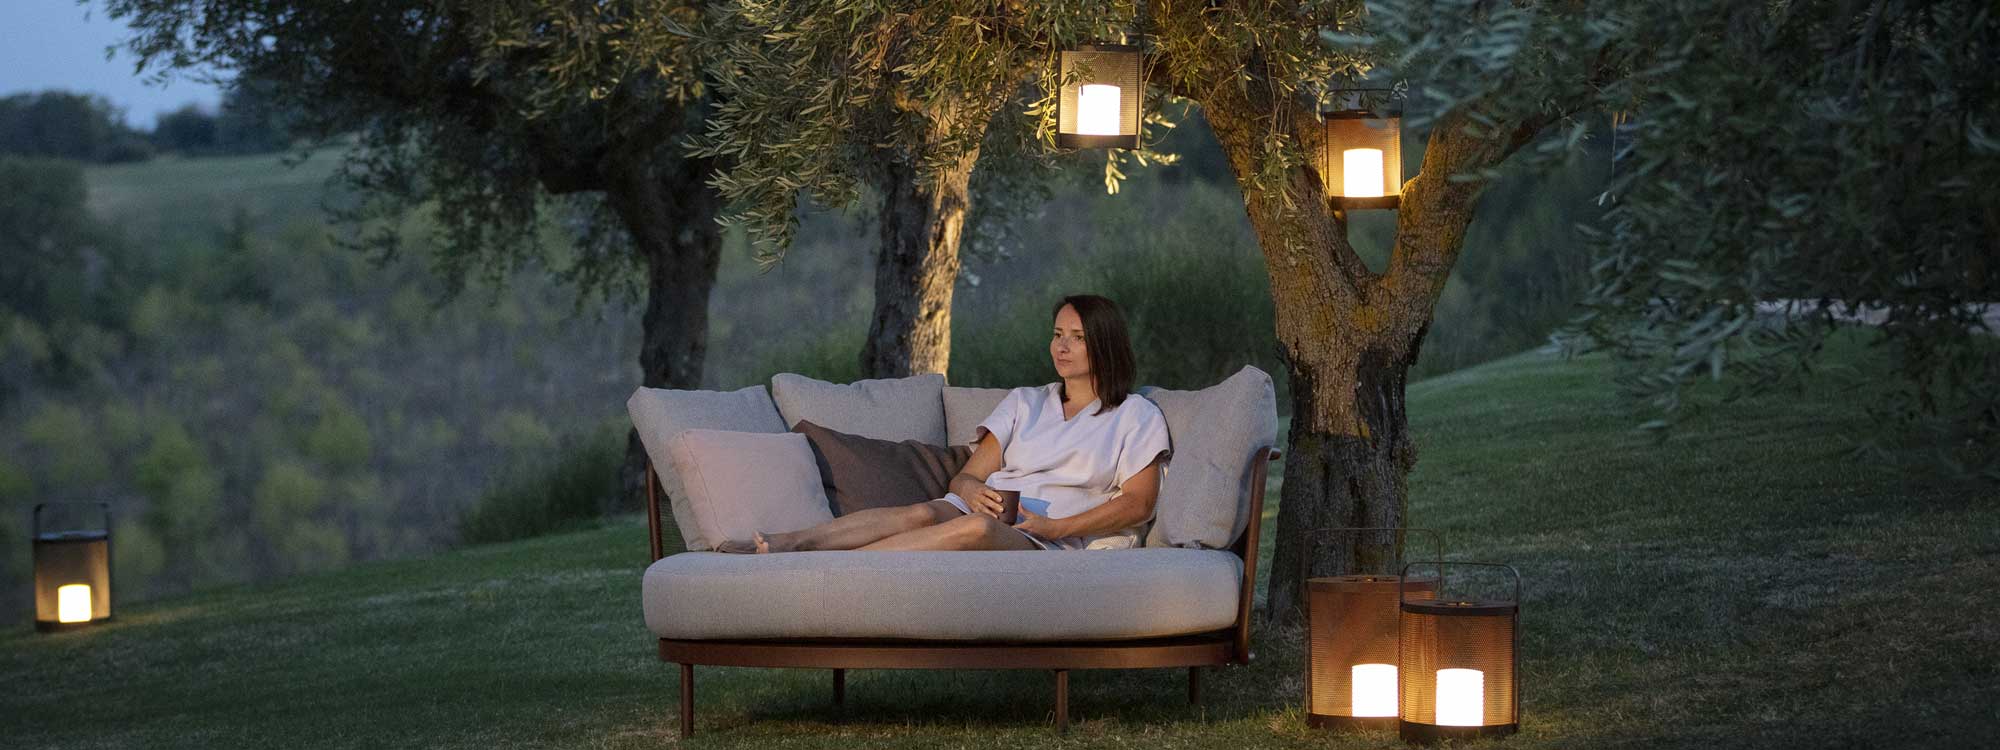 Image of woman sat holding drink in Baza daybed at dusk, beneath tree with lit Luci garden lanterns hanging from branches